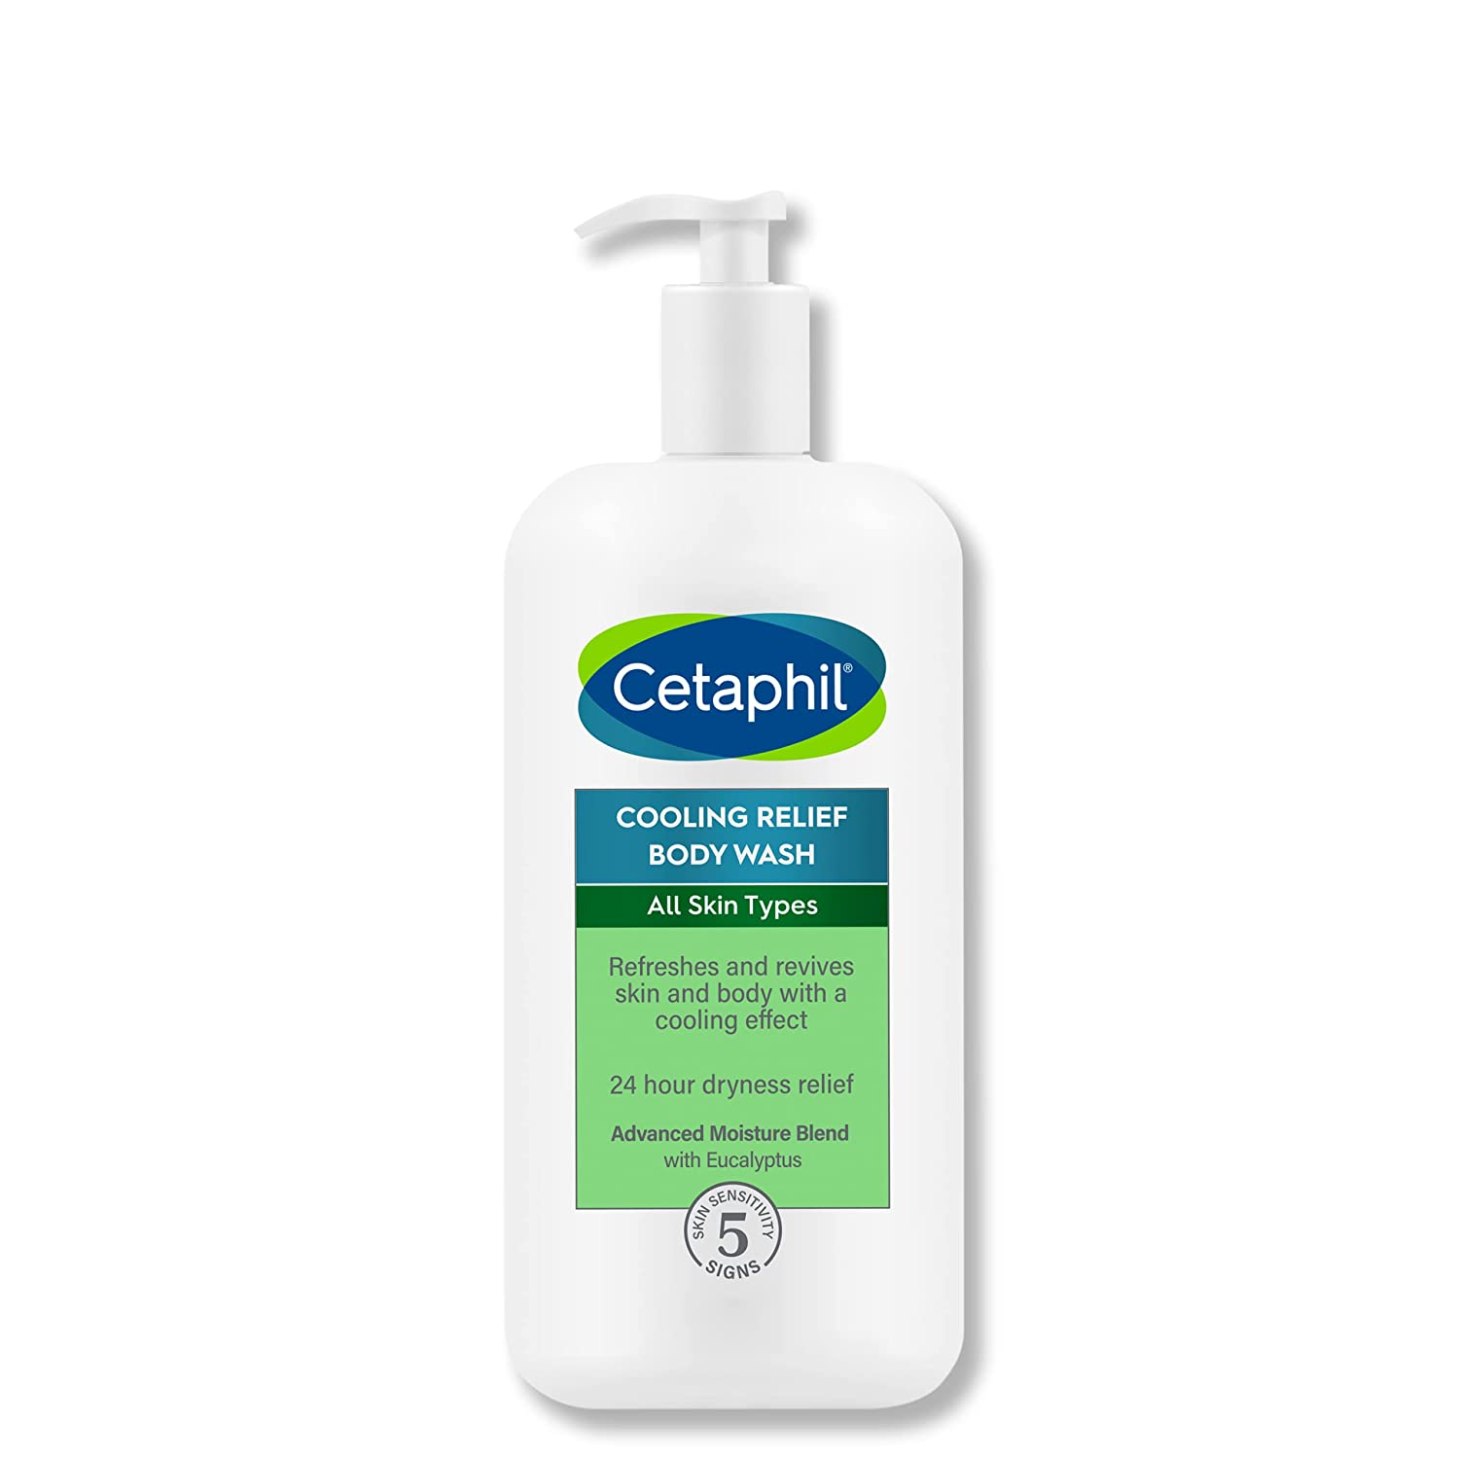 Cetaphil Cooling Relief Body Wash